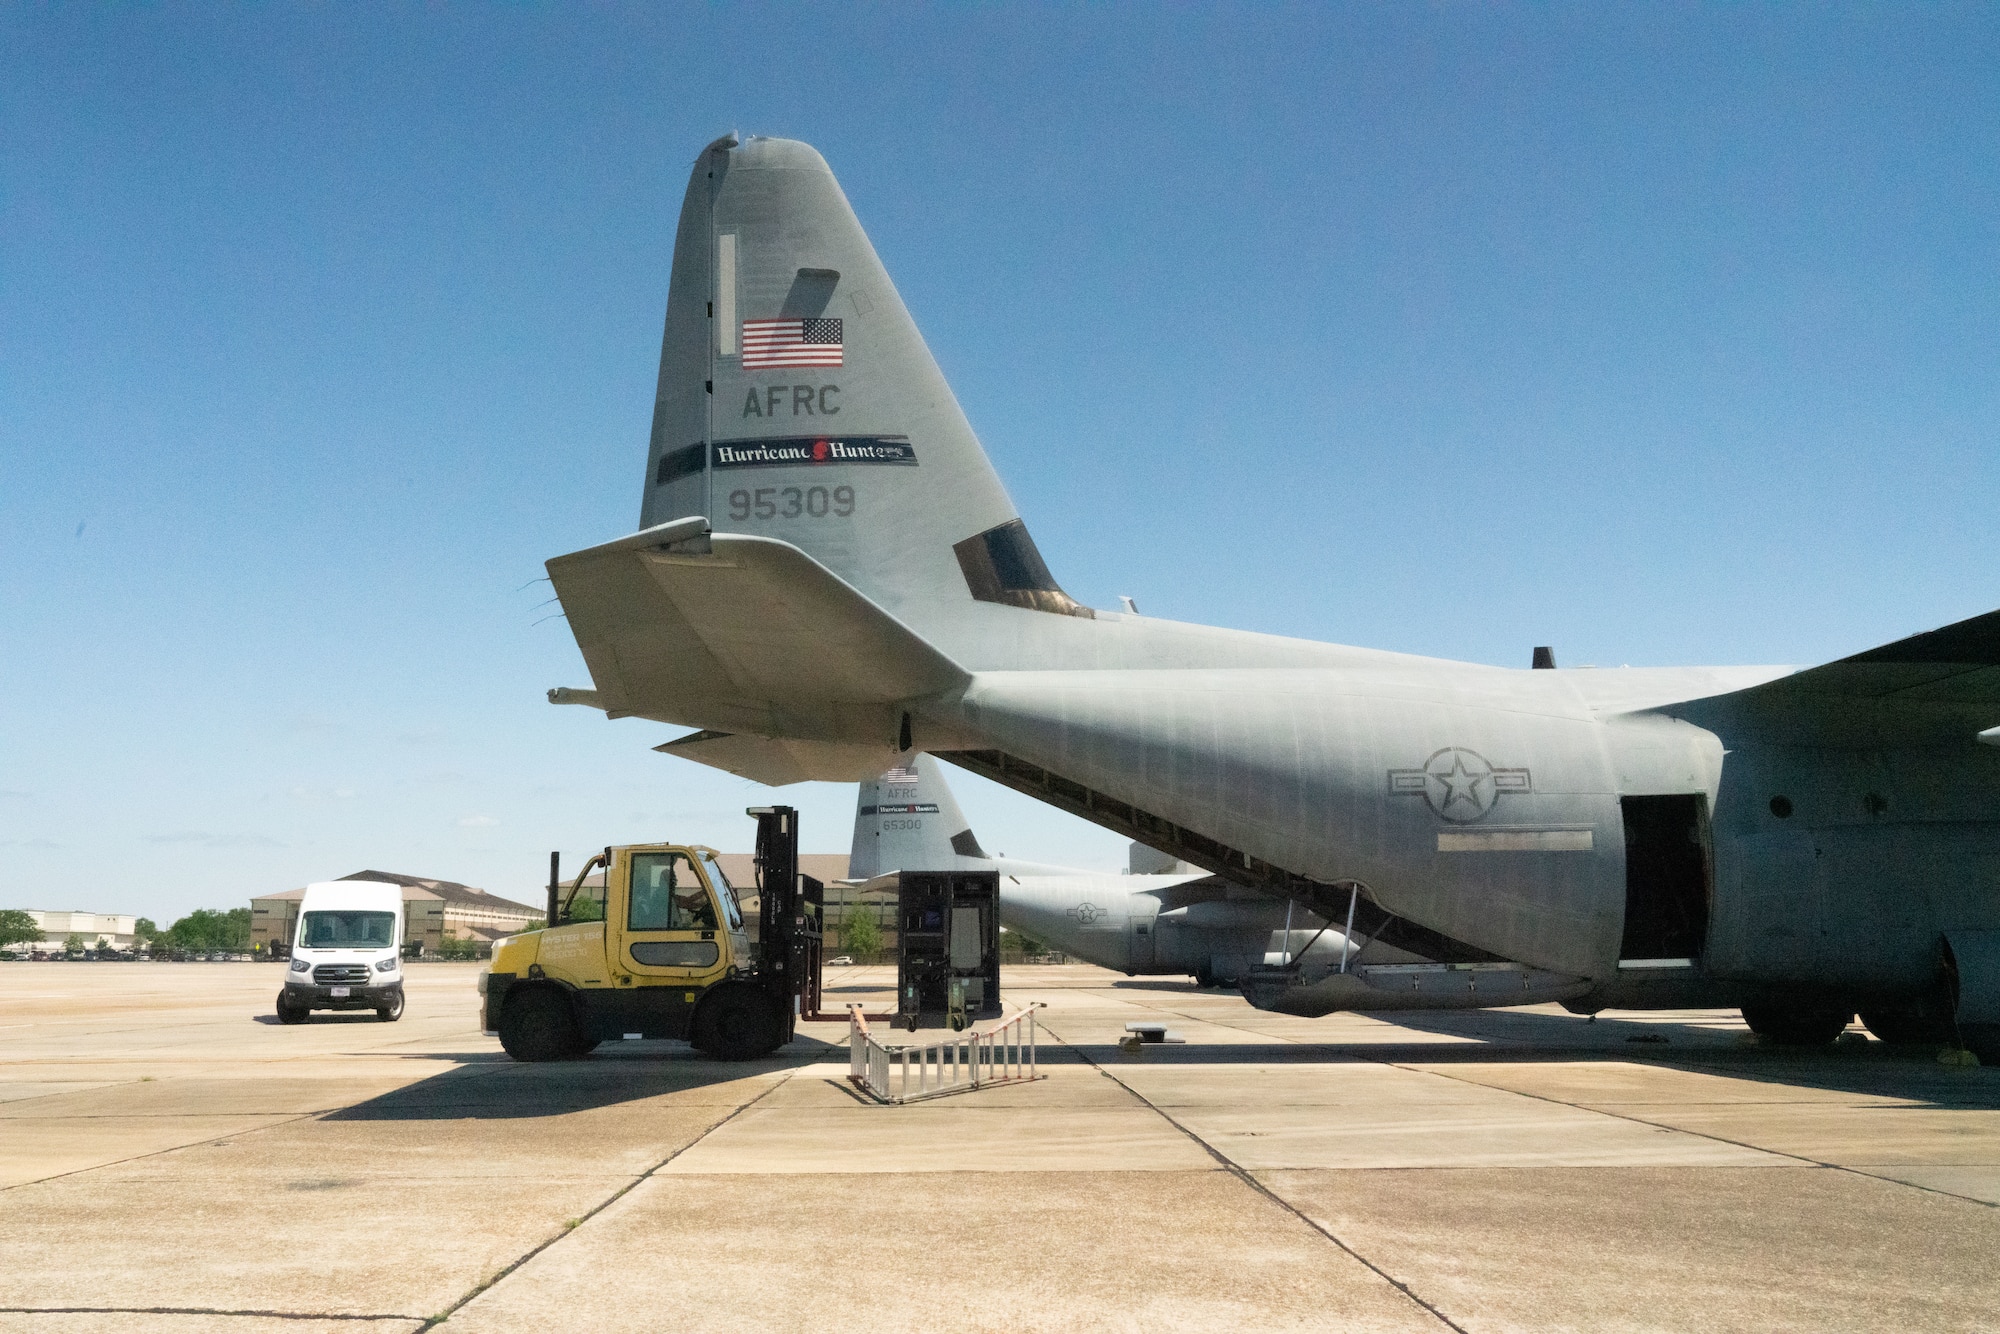 Master Sgt. Robert Ramos, 403rd Maintenance Squadron avionics flight chief, operates the forklift loading an aerial weather officer station onto a WC-130J Super Hercules aircraft at Keesler Air Force Base, Miss., May 13, 2021 The 53rd Weather Reconnaissance Squadron, “Hurricane Hunters,” ARWO and loadmaster/dropsonde operator stations are being upgraded with hardware and software to increase their weather collecting capabilities. (U.S. Air Force photo by 2nd Lt. Christopher Carranza)